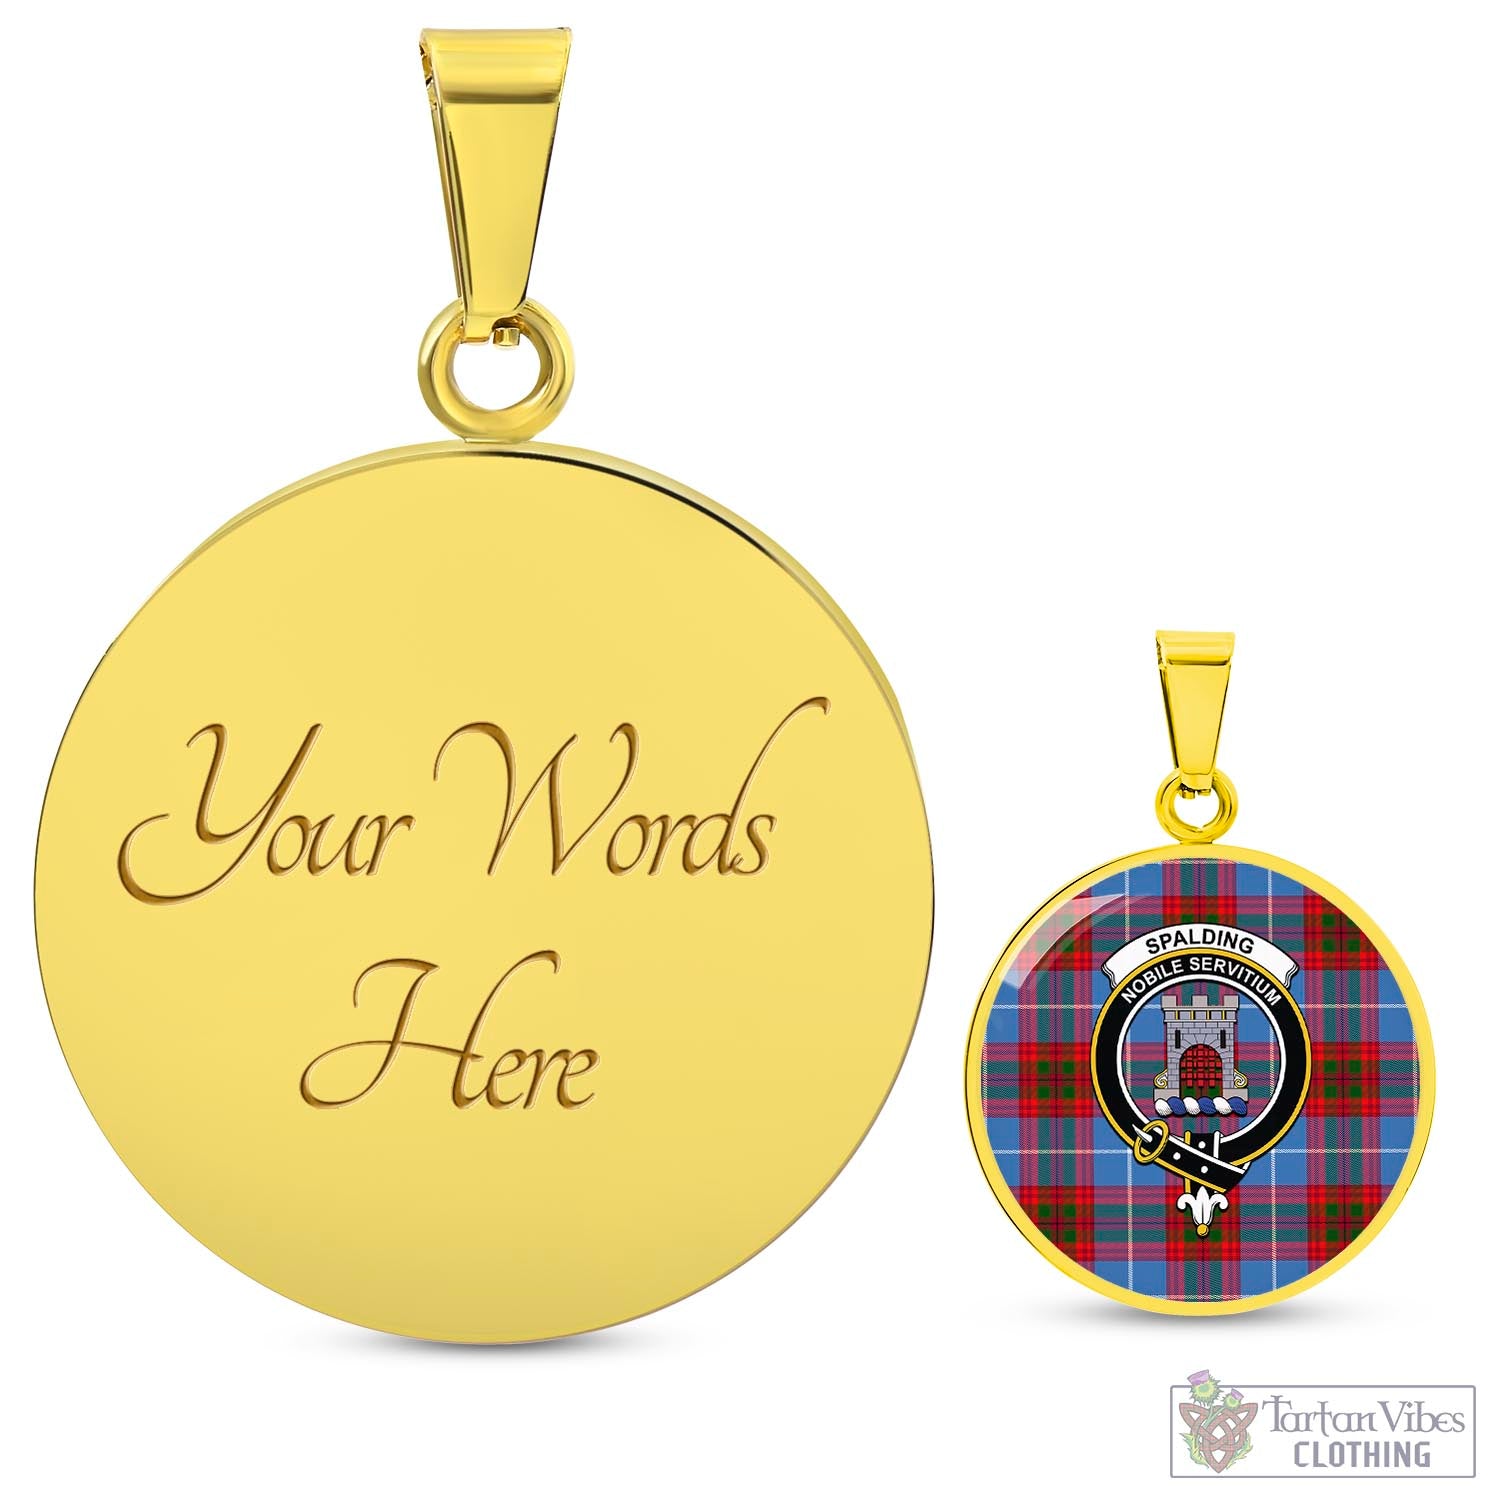 Tartan Vibes Clothing Spalding Tartan Circle Necklace with Family Crest